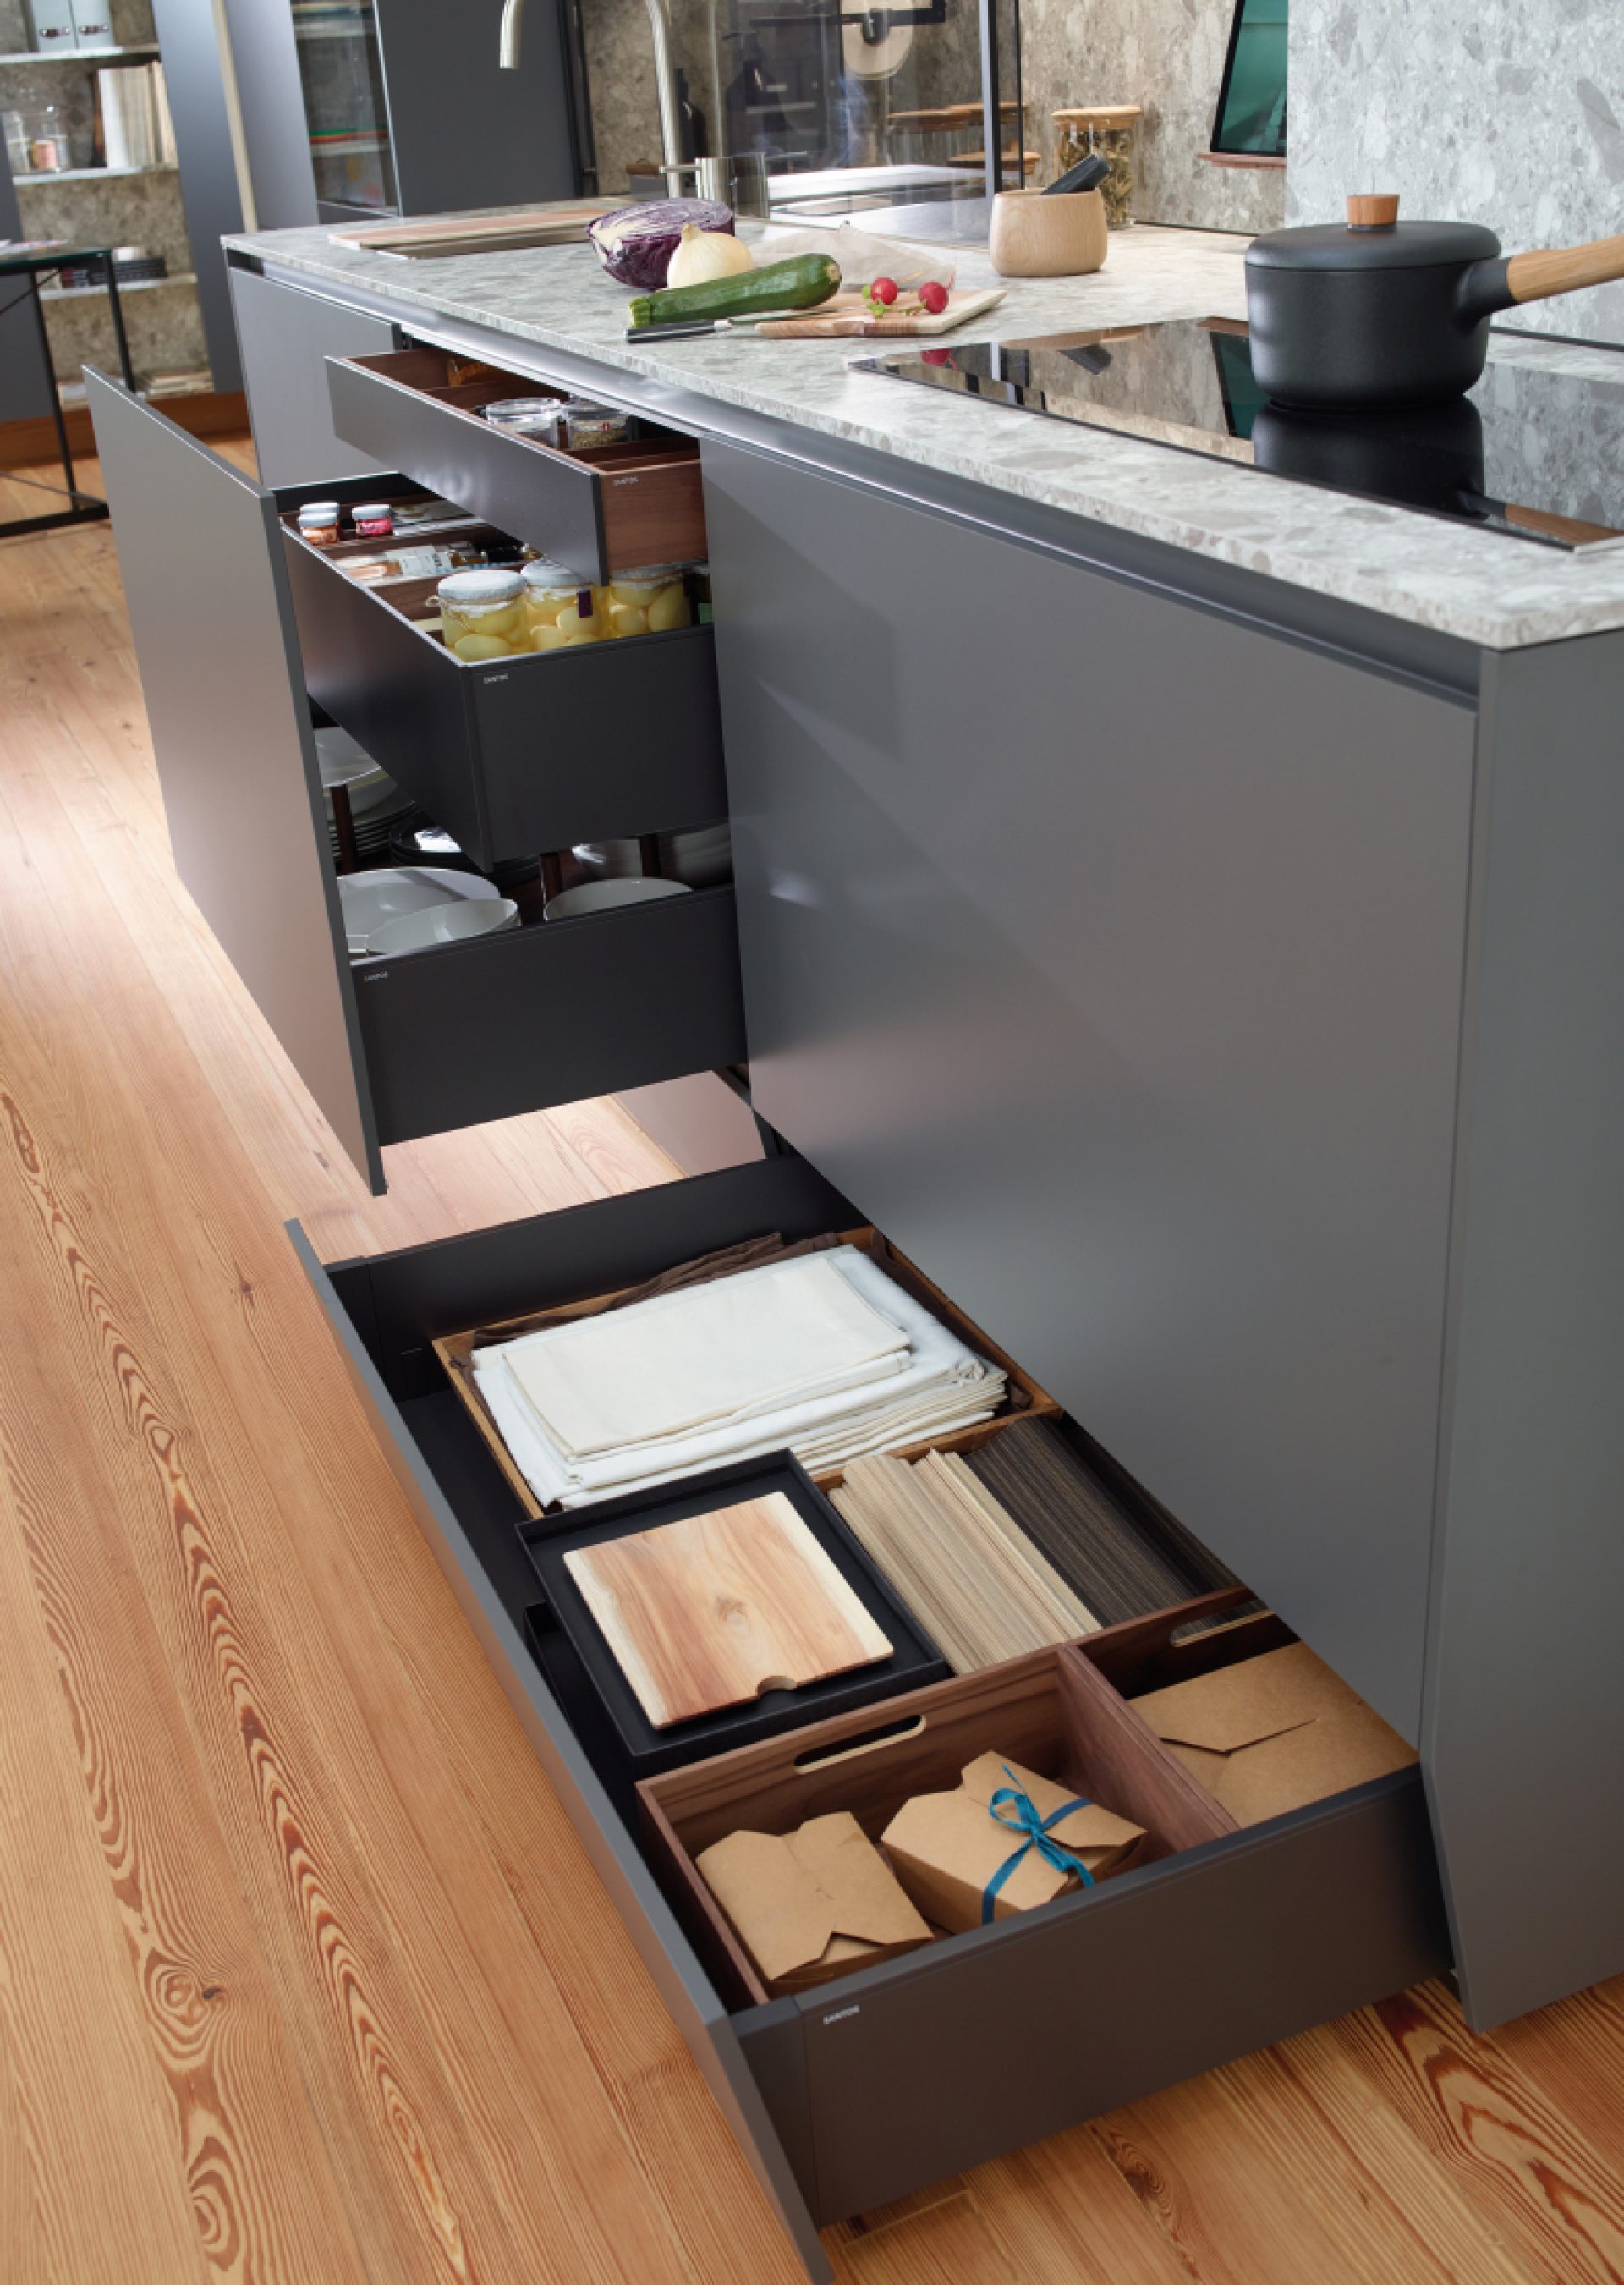 Image of kitchen plinth drawers with practical storage space